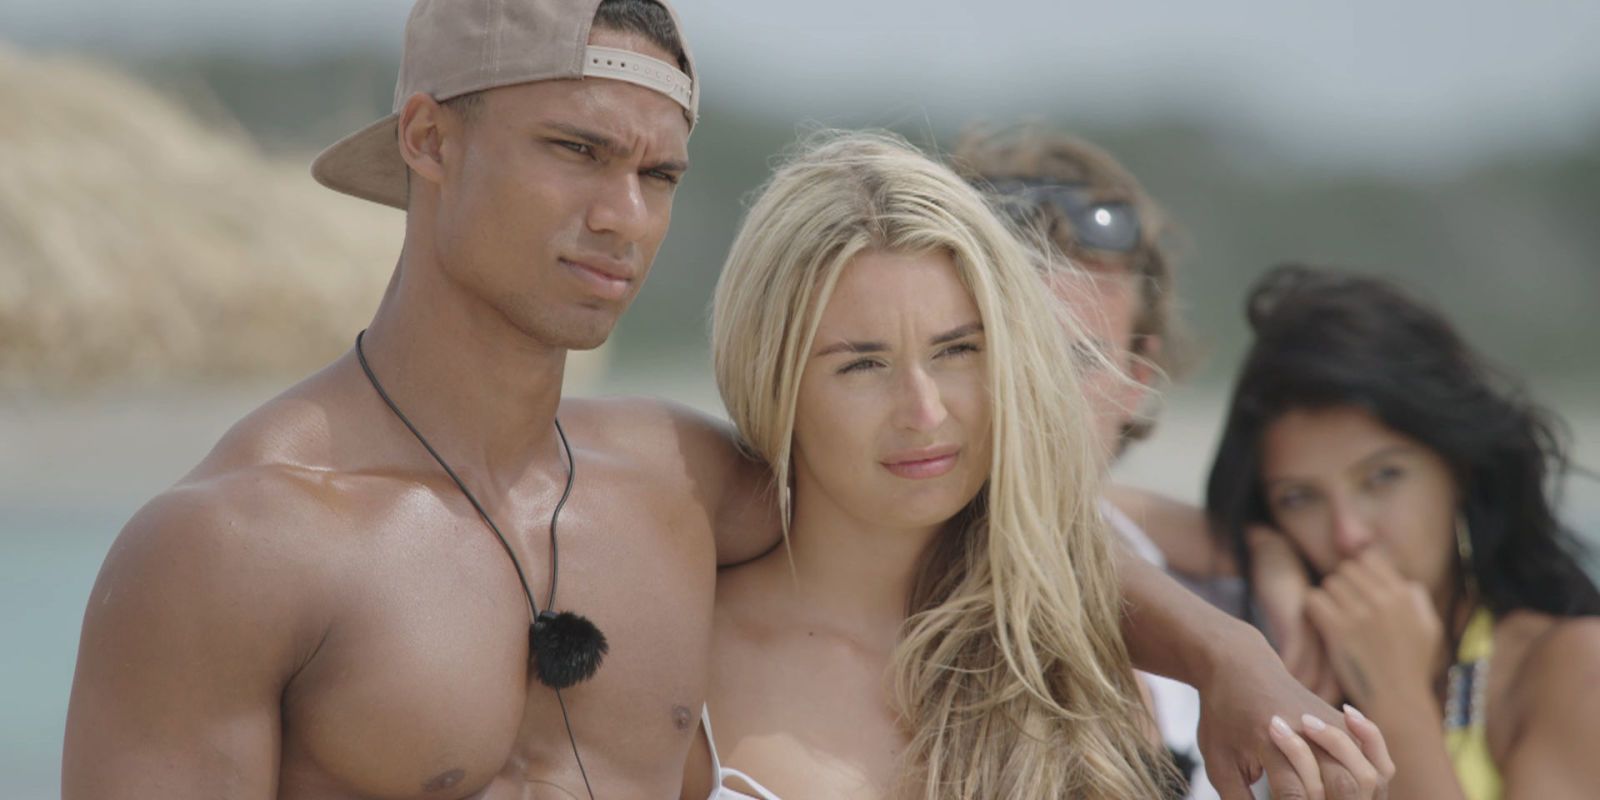 10 Best Love Island UK Couples Of All Time According To Reddit